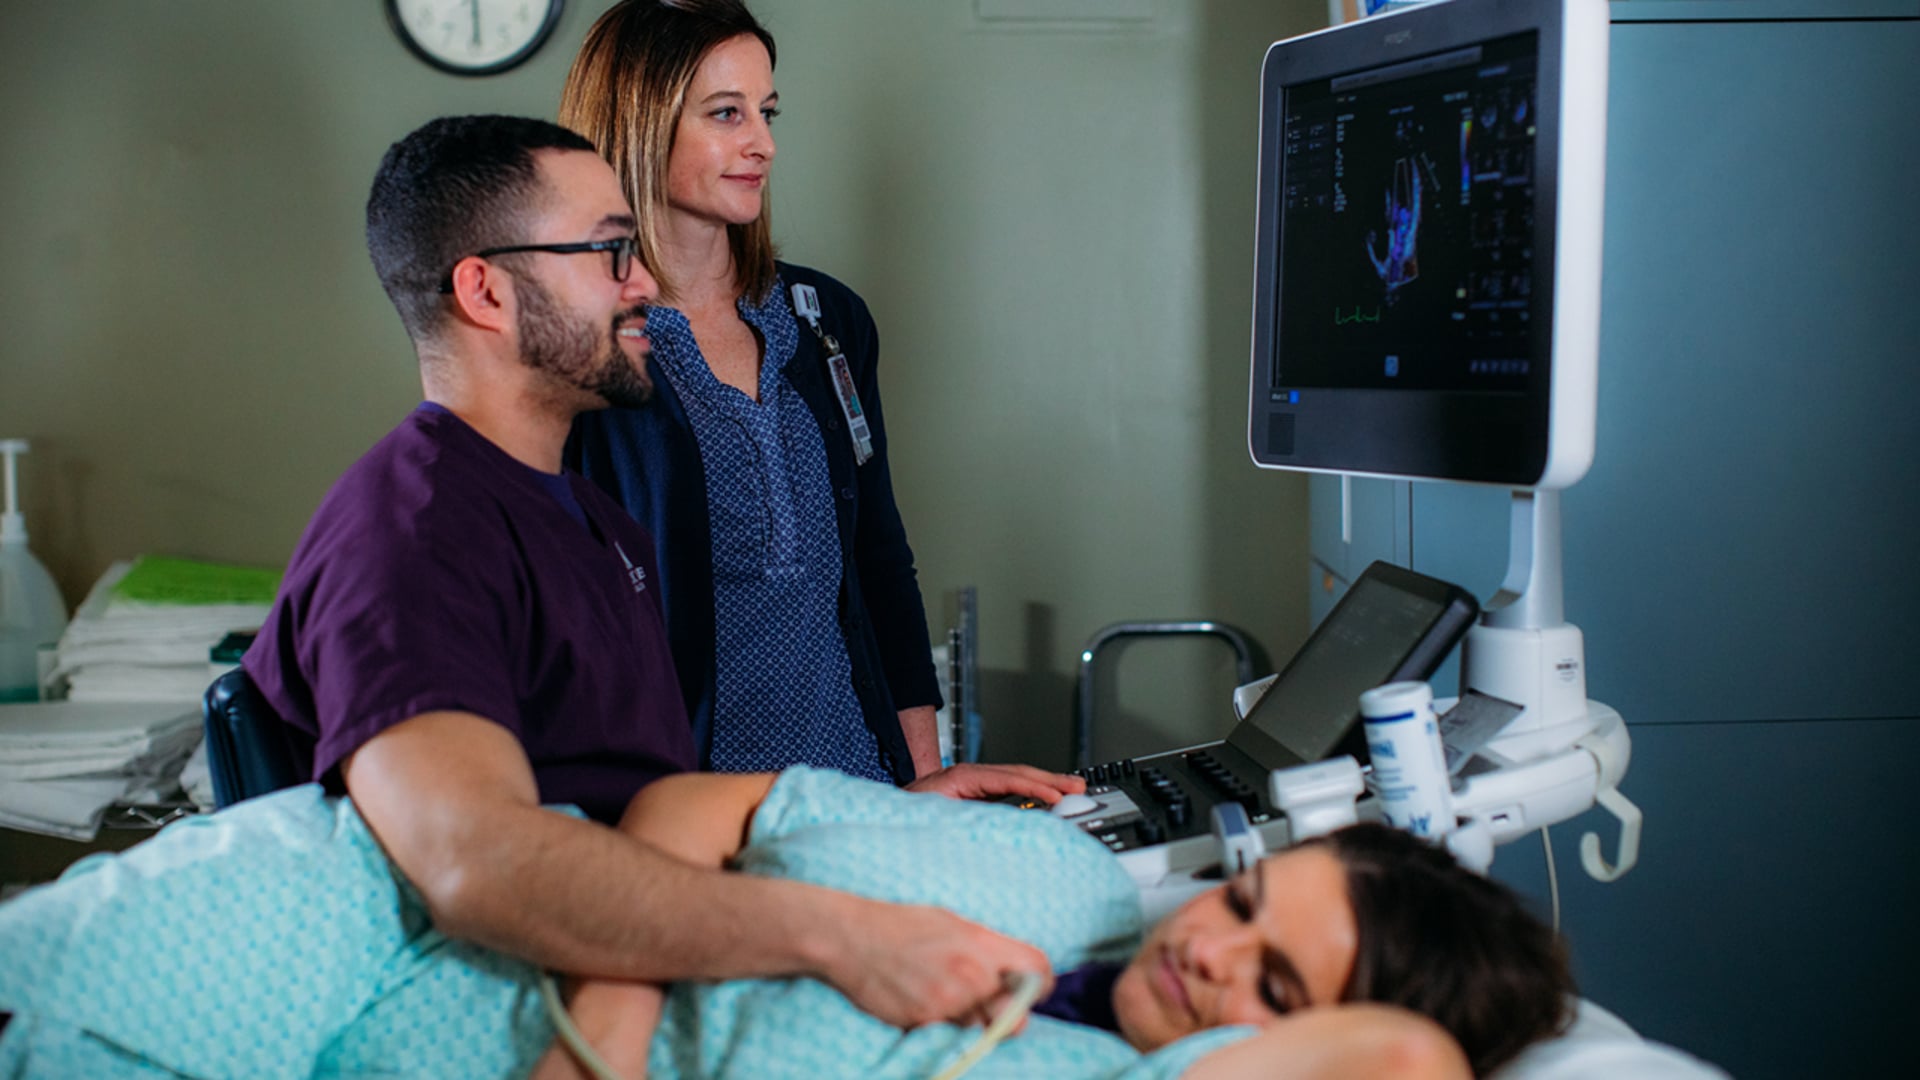 Get an Associate Degree in Diagnostic Medical Sonography | Mercy College of Health Sciences